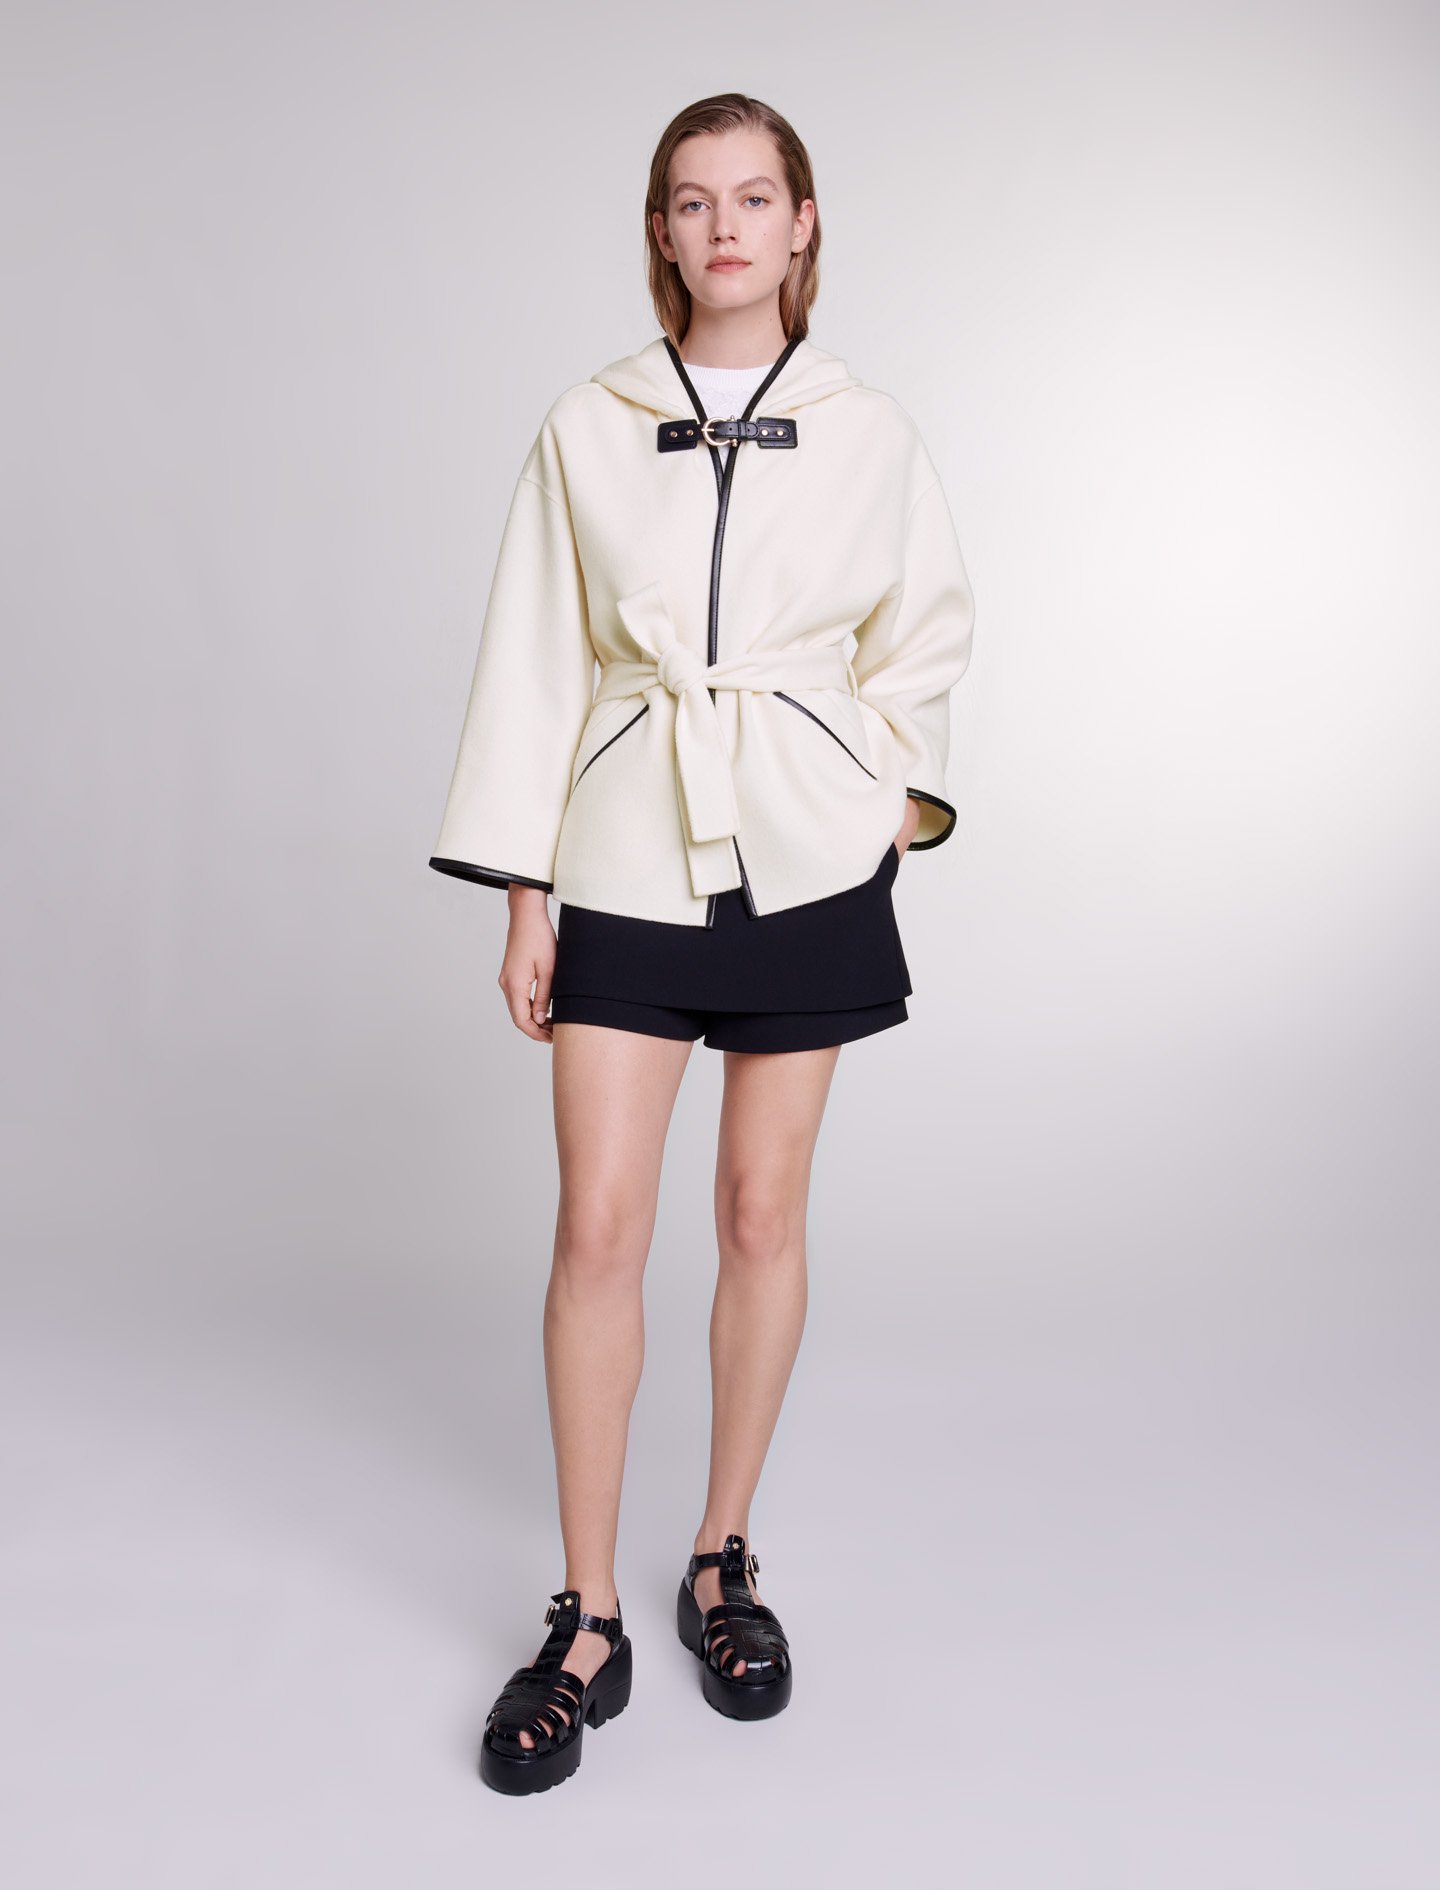 Mixte's wool, Cape-style wool coat for Spring/Summer, size Mixte-Coats-US L / FR 40, in color White / White